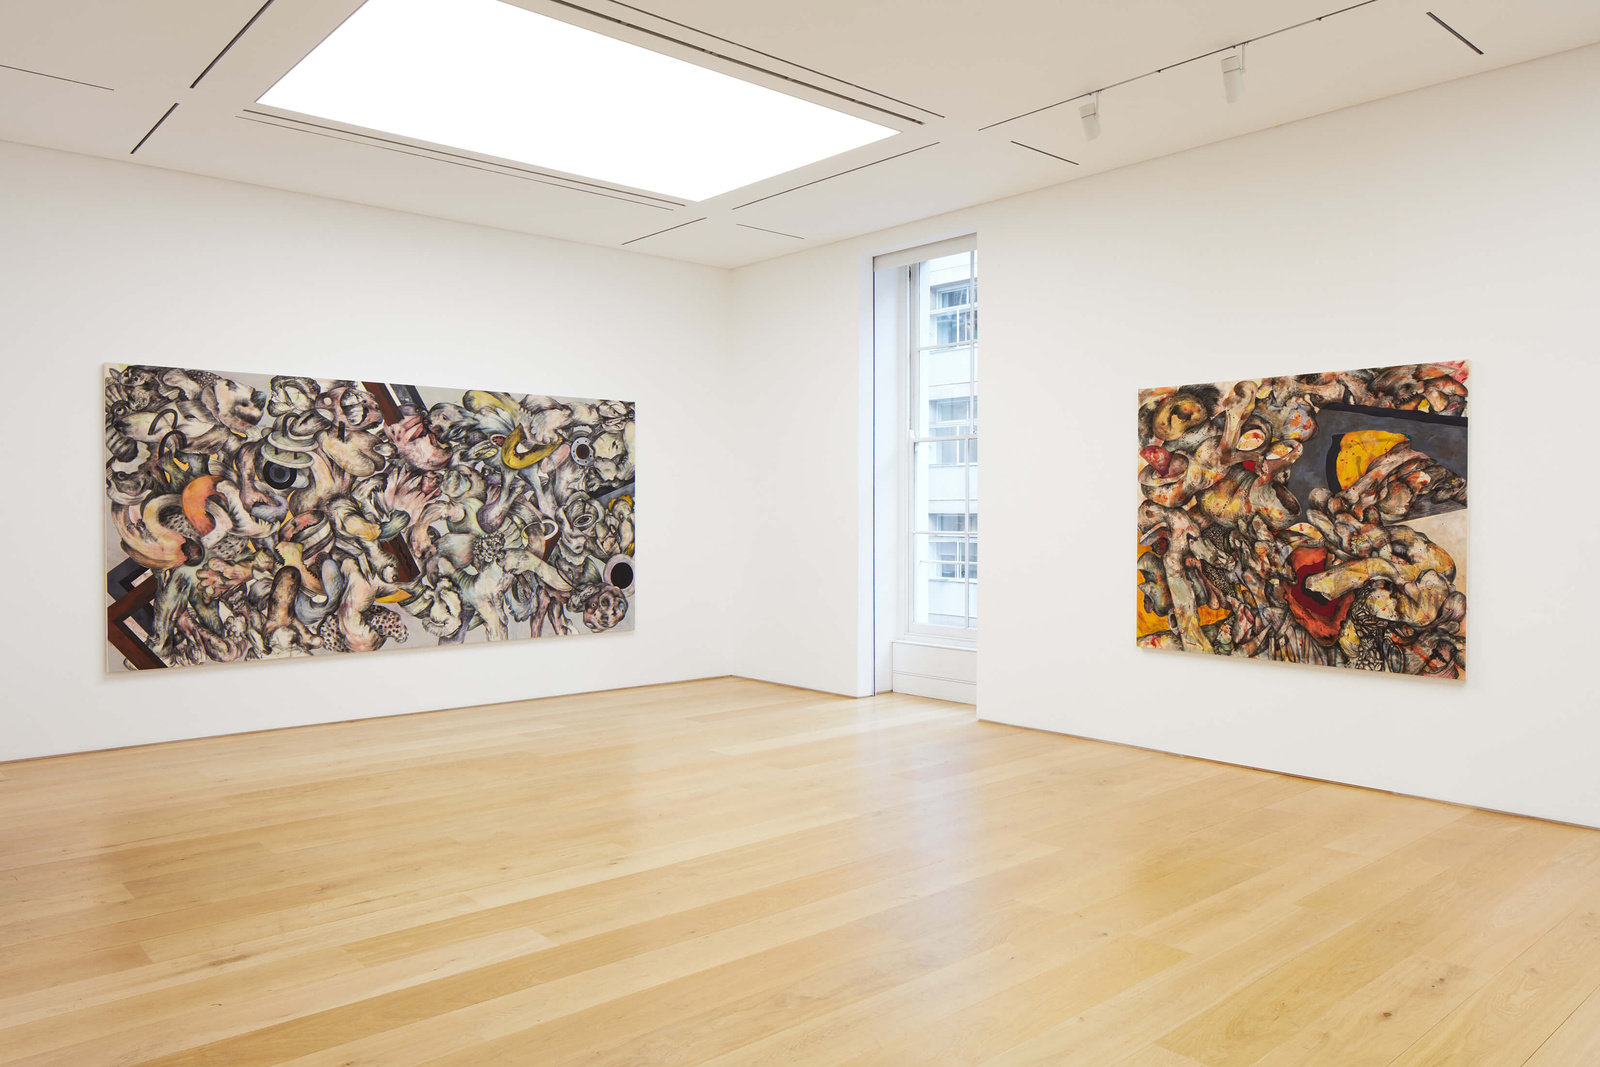 Installation view 01 by ahmed alsoudani marlborough contemporary london